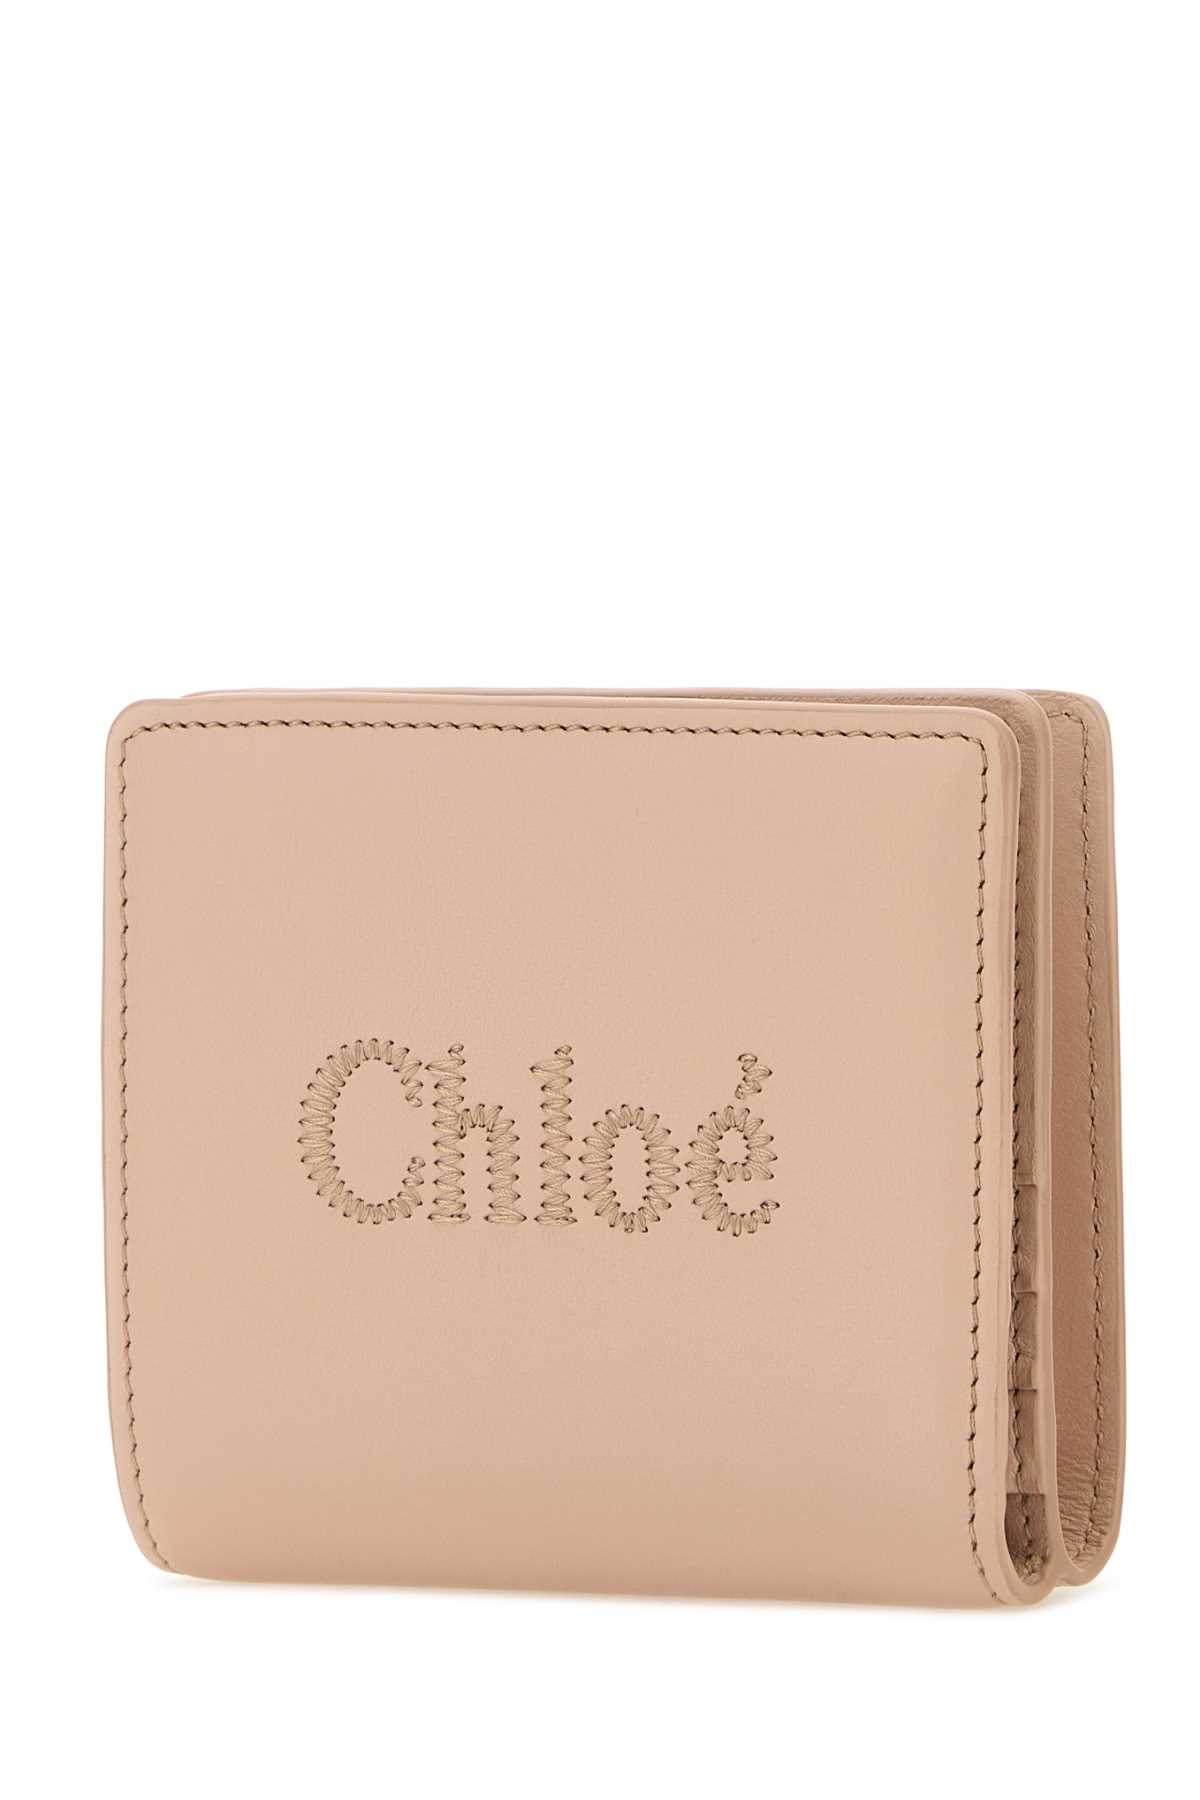 Chloé Skin Pink Leather Wallet In Cementpink